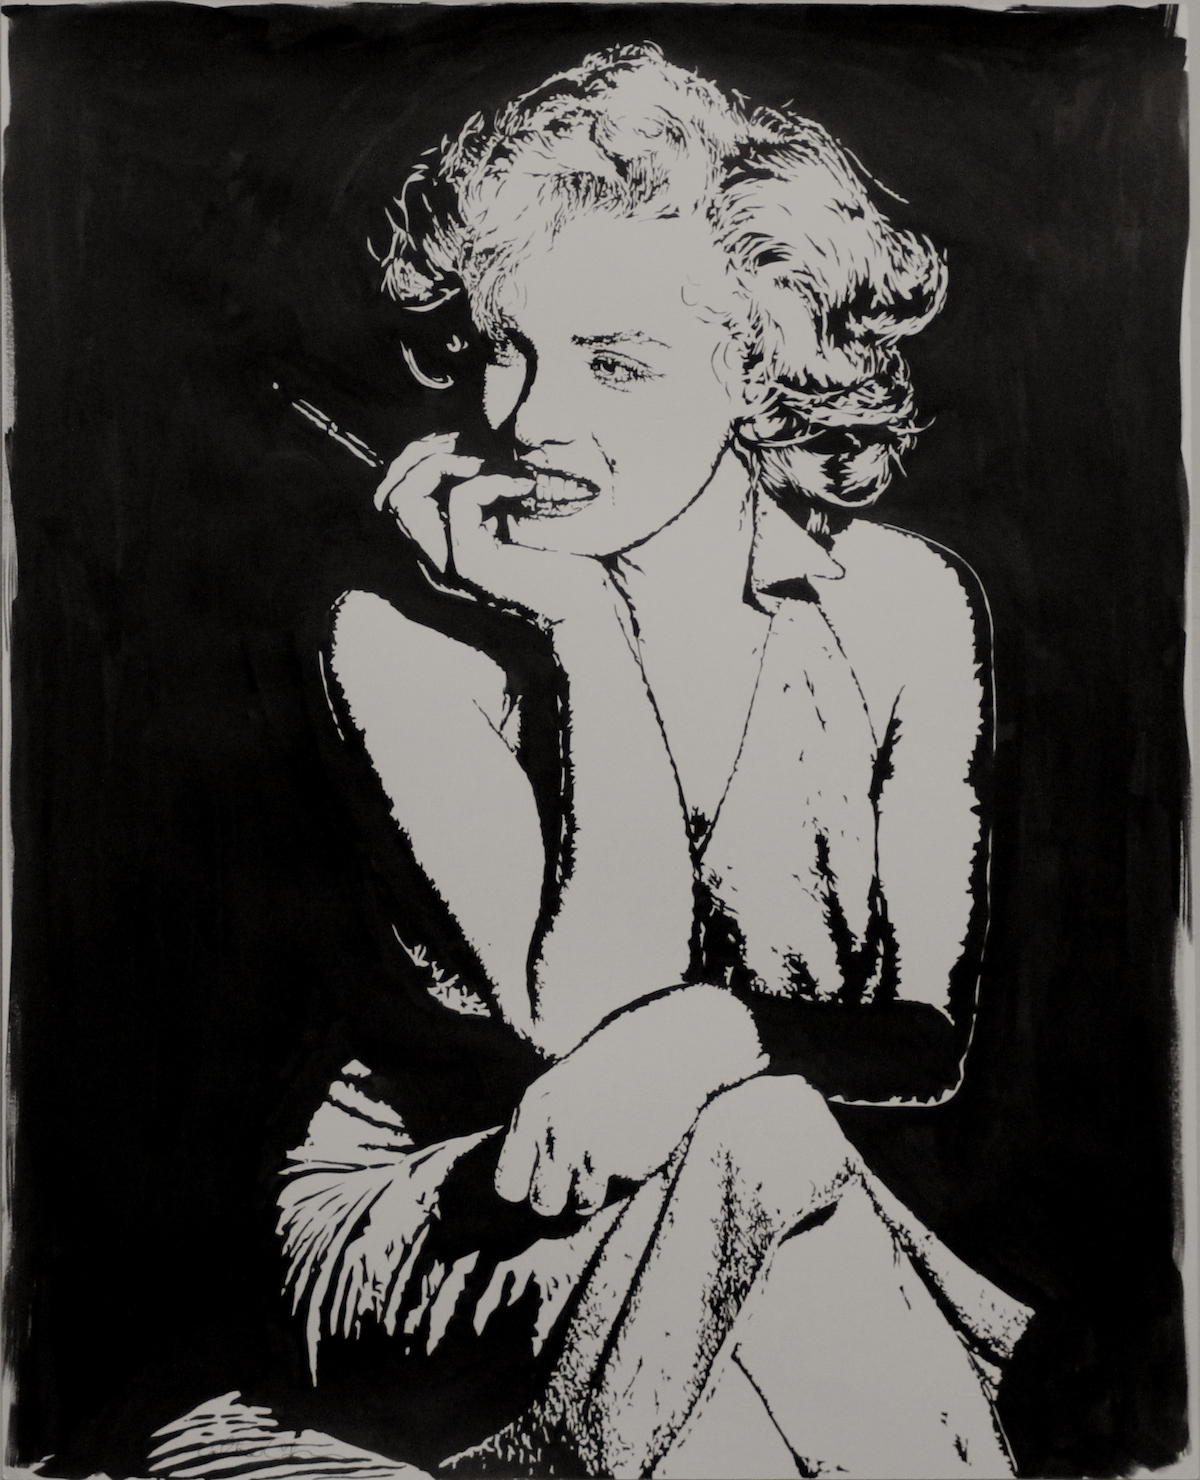 Black and white painting of Marilyn Monroe